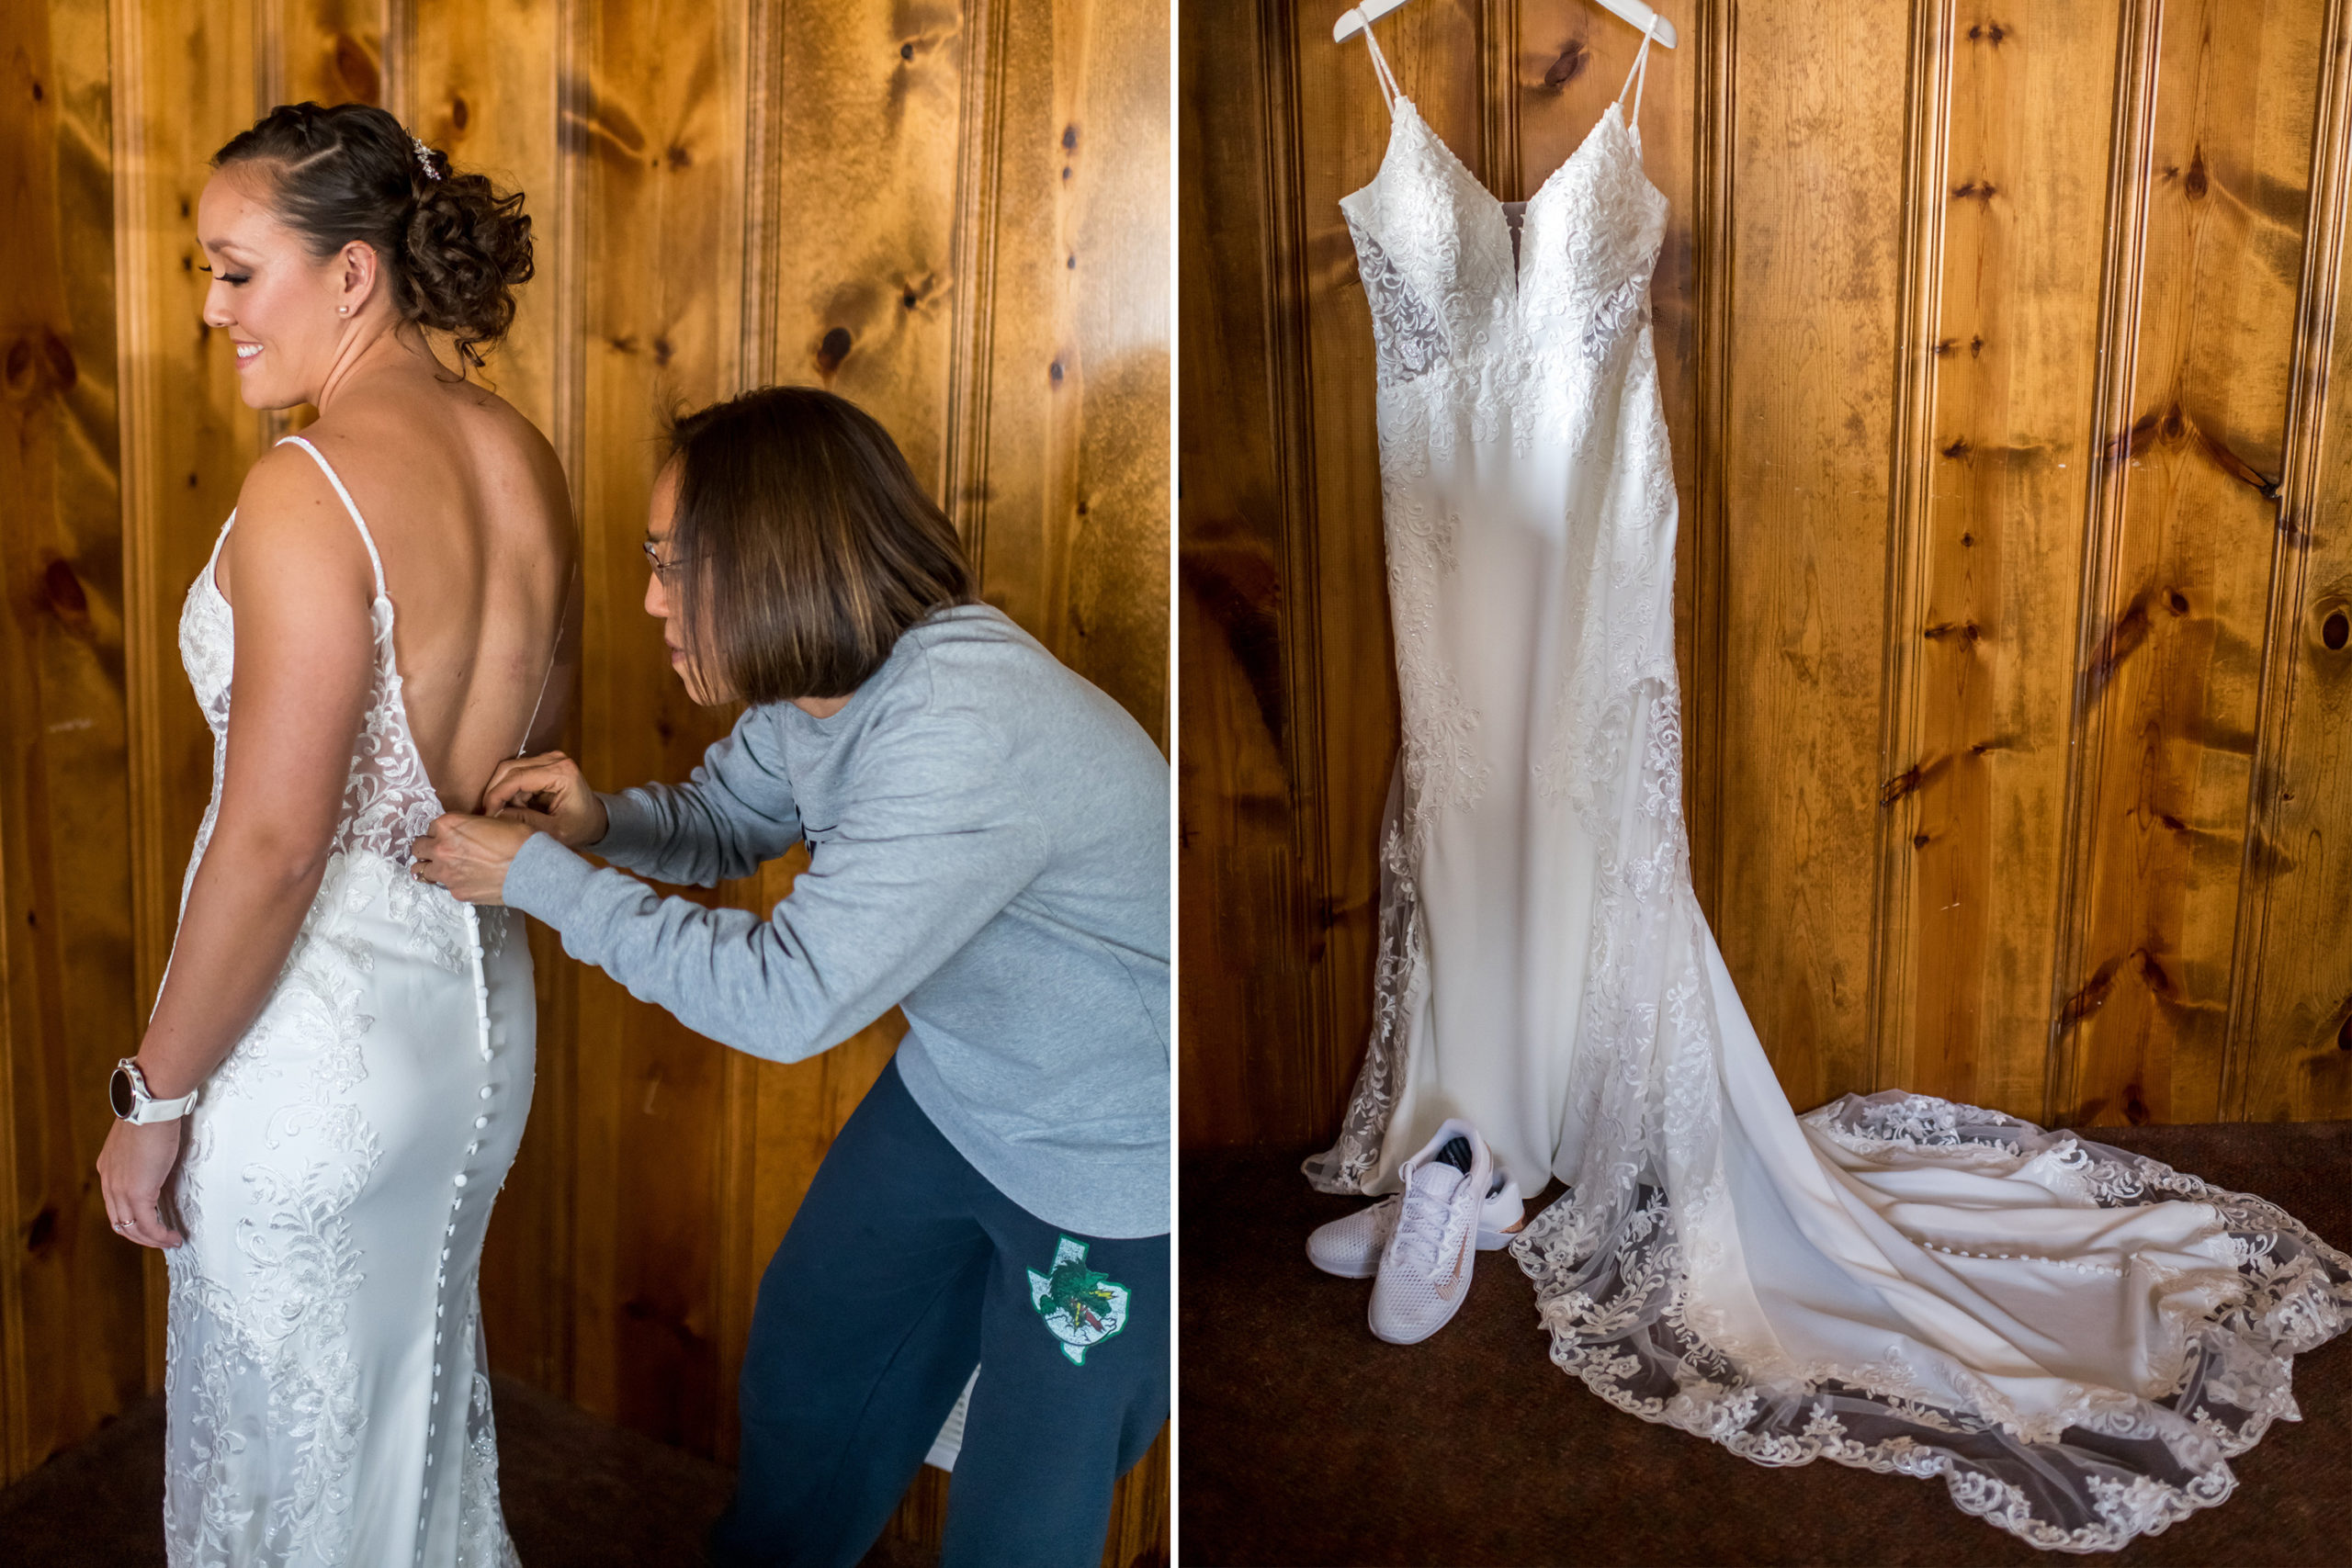 The bride gets ready in her dress during her YMCA of the Rockies wedding in Estes Park, Colorado.